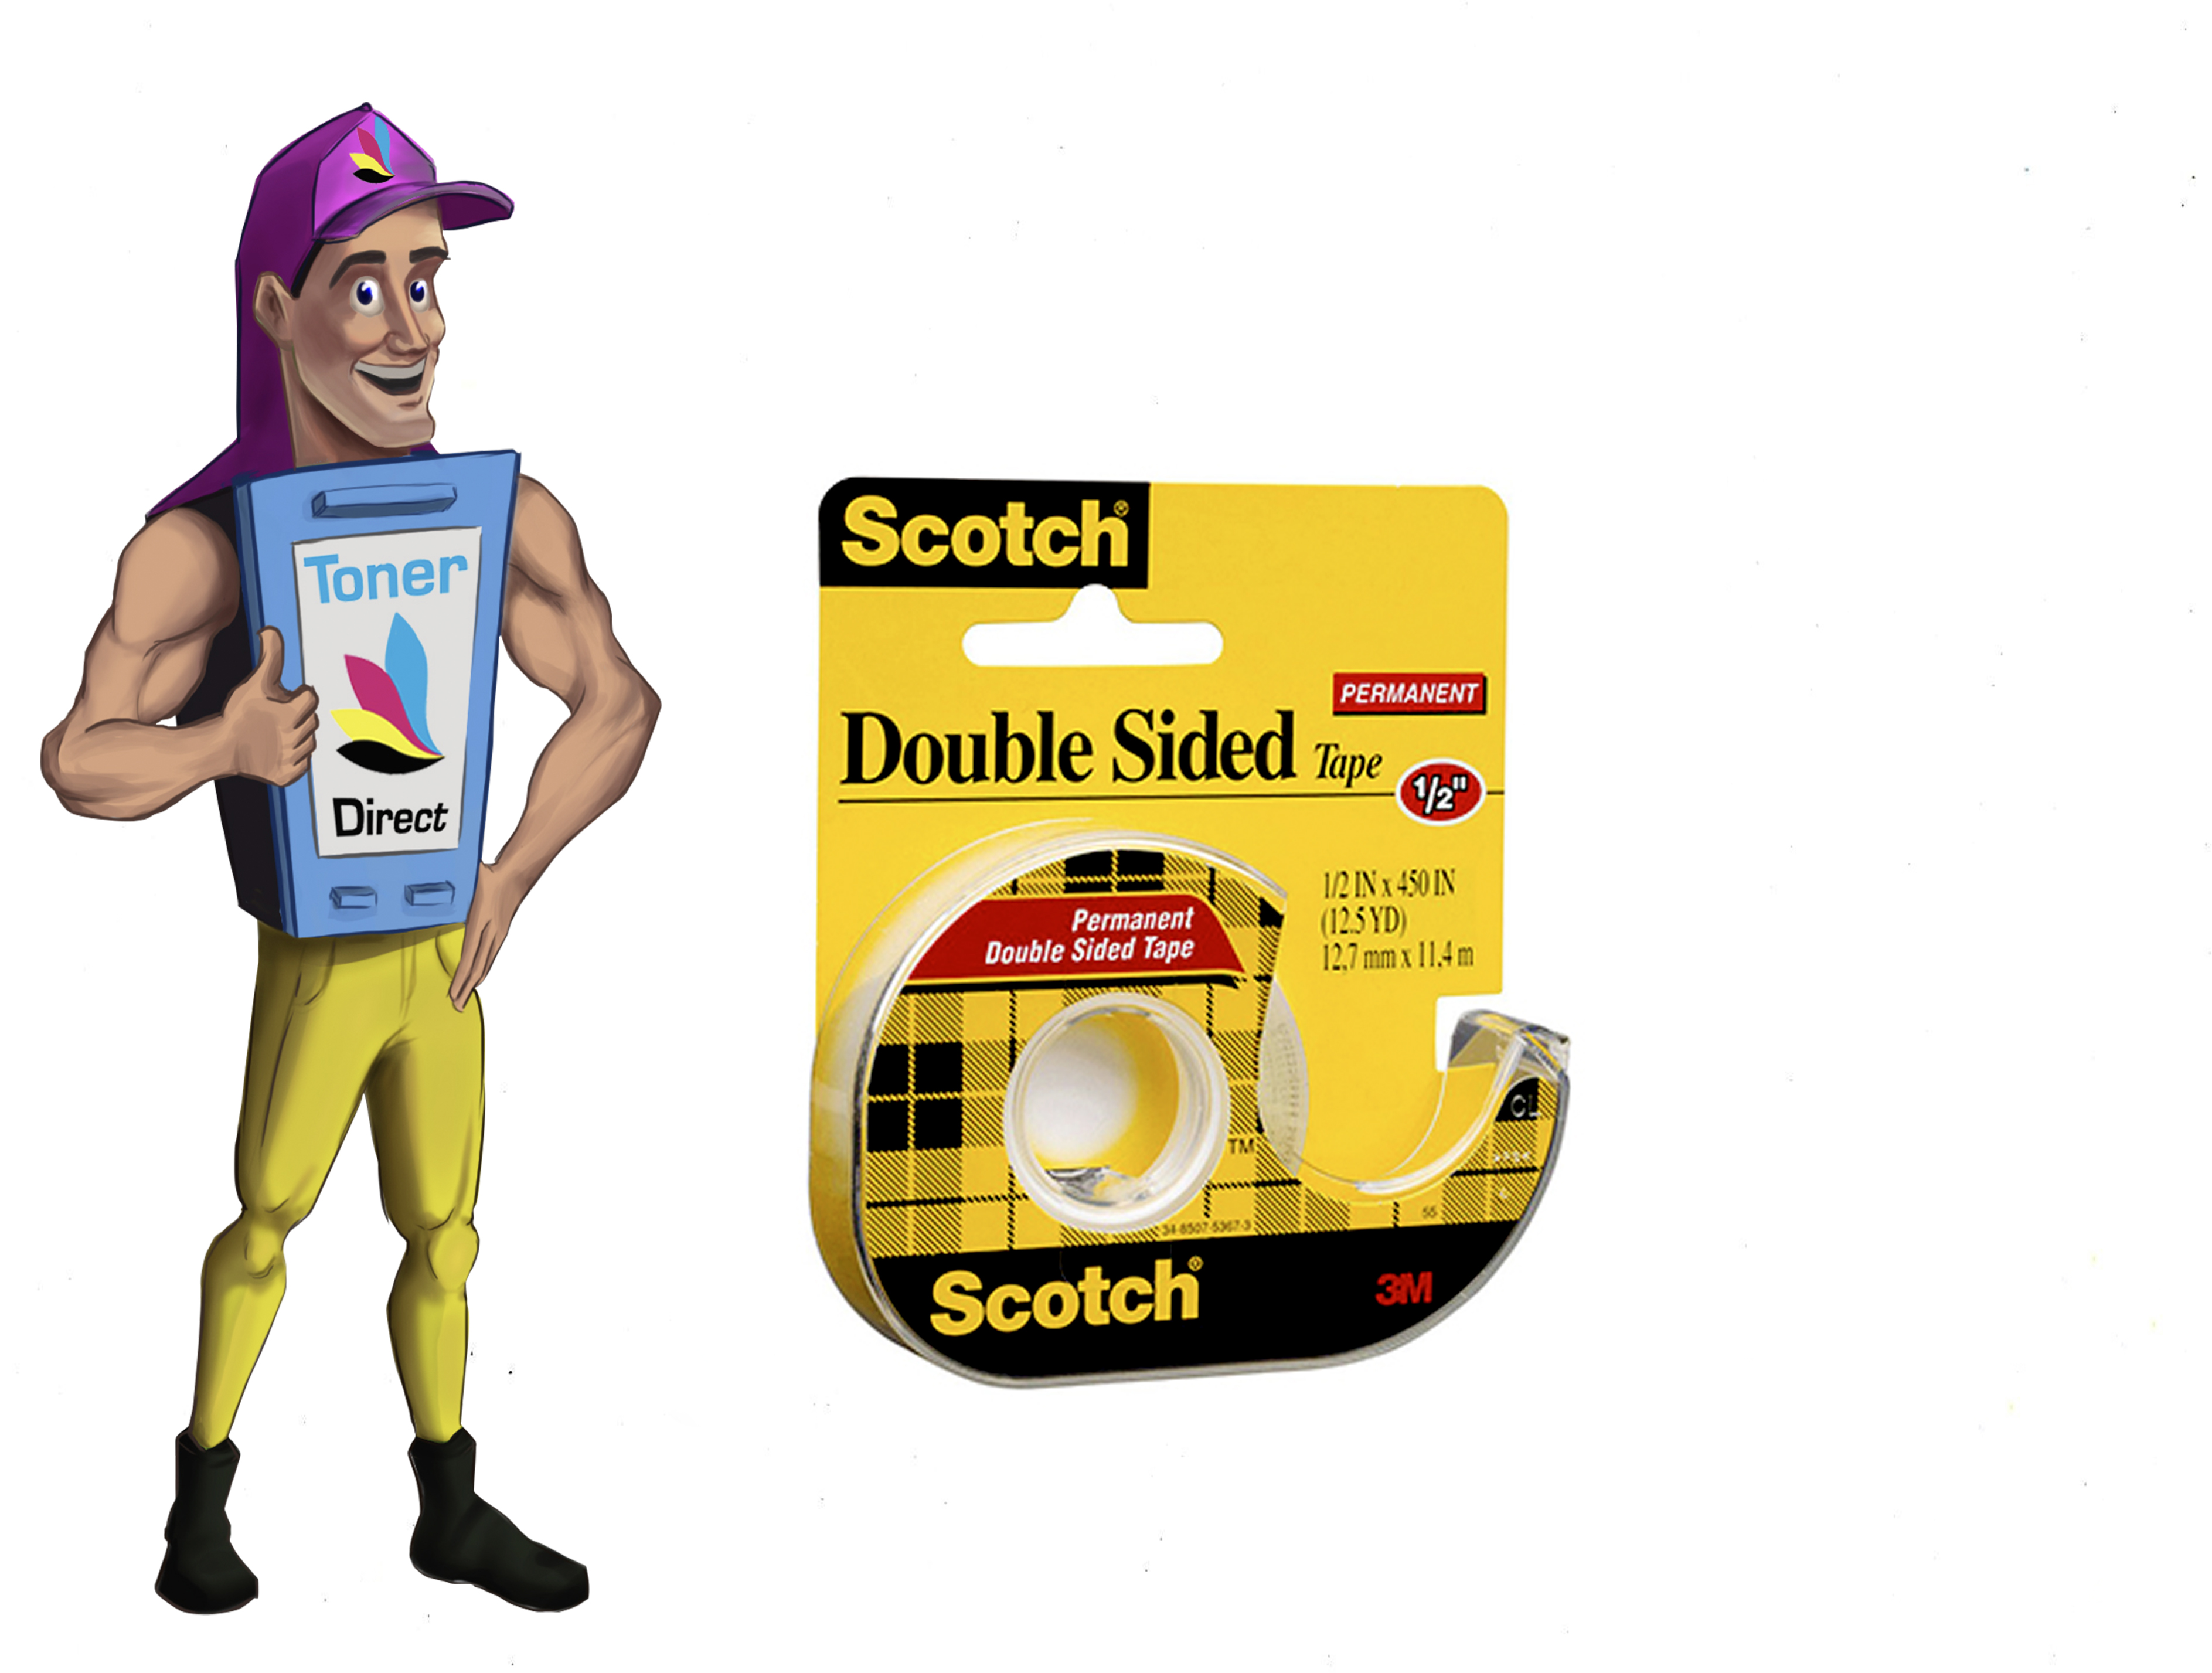 load scotch double sided tape dispenser